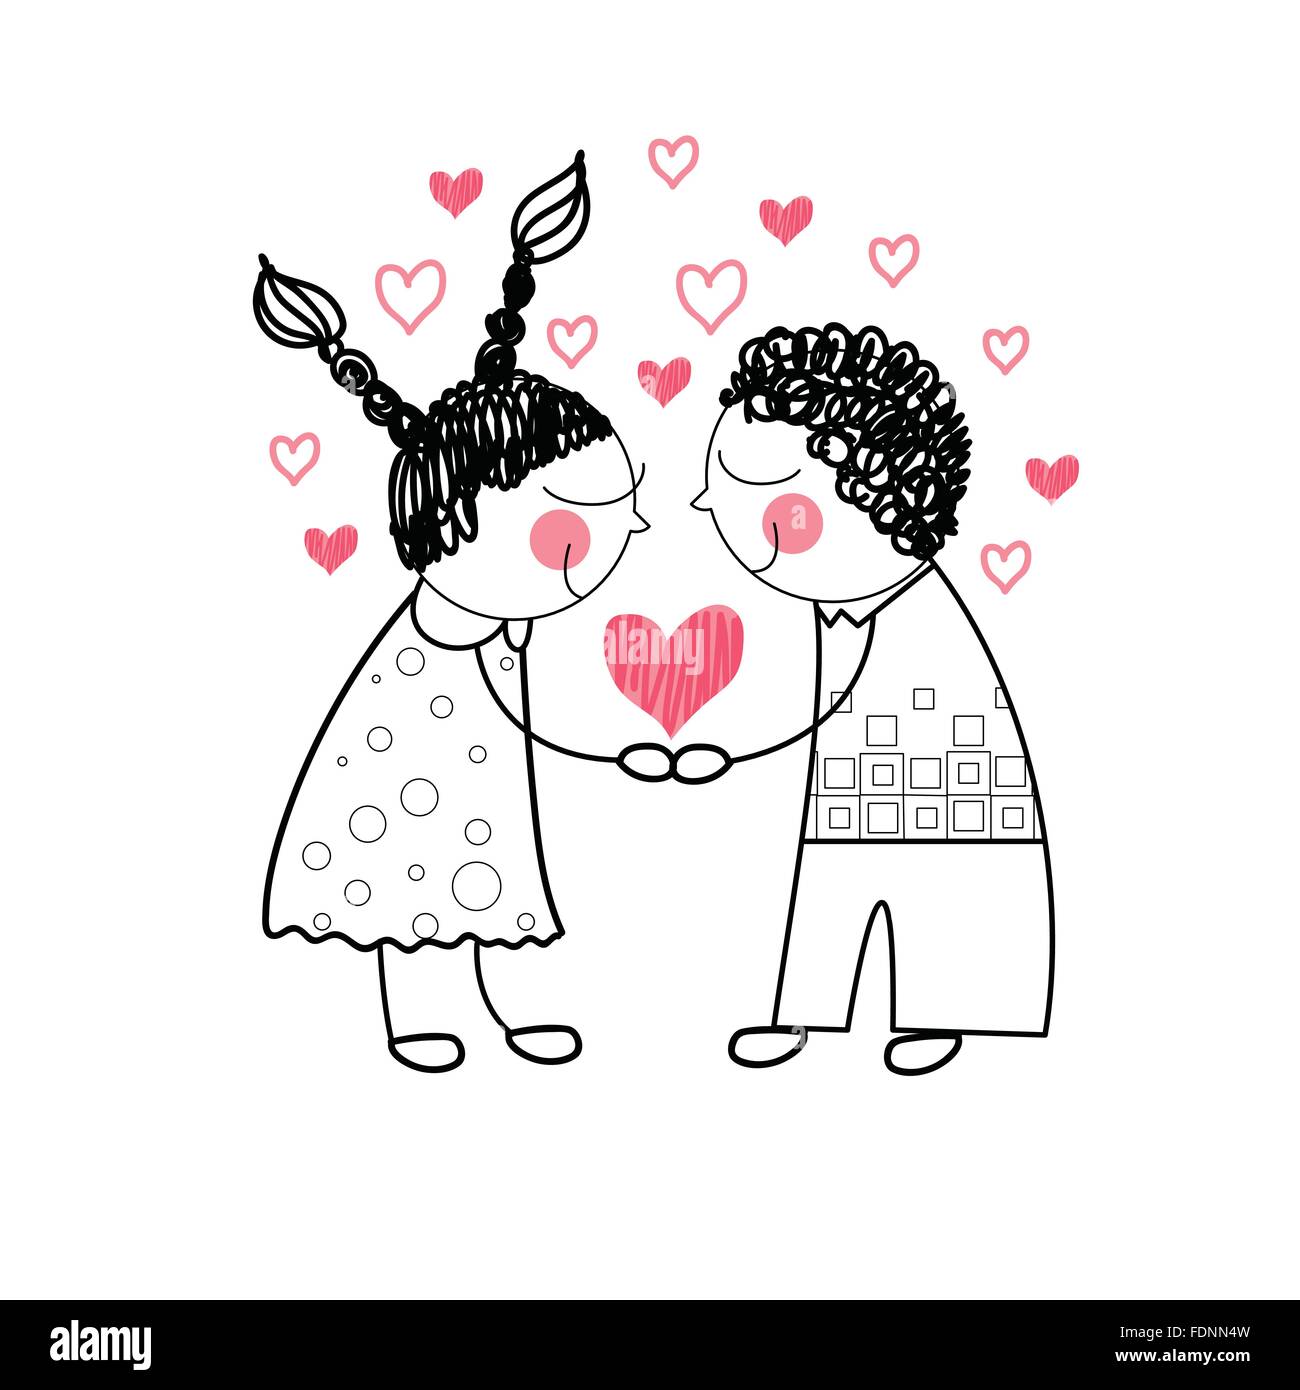 Doodle: I Love You's in Boo's by OdieFarber on DeviantArt